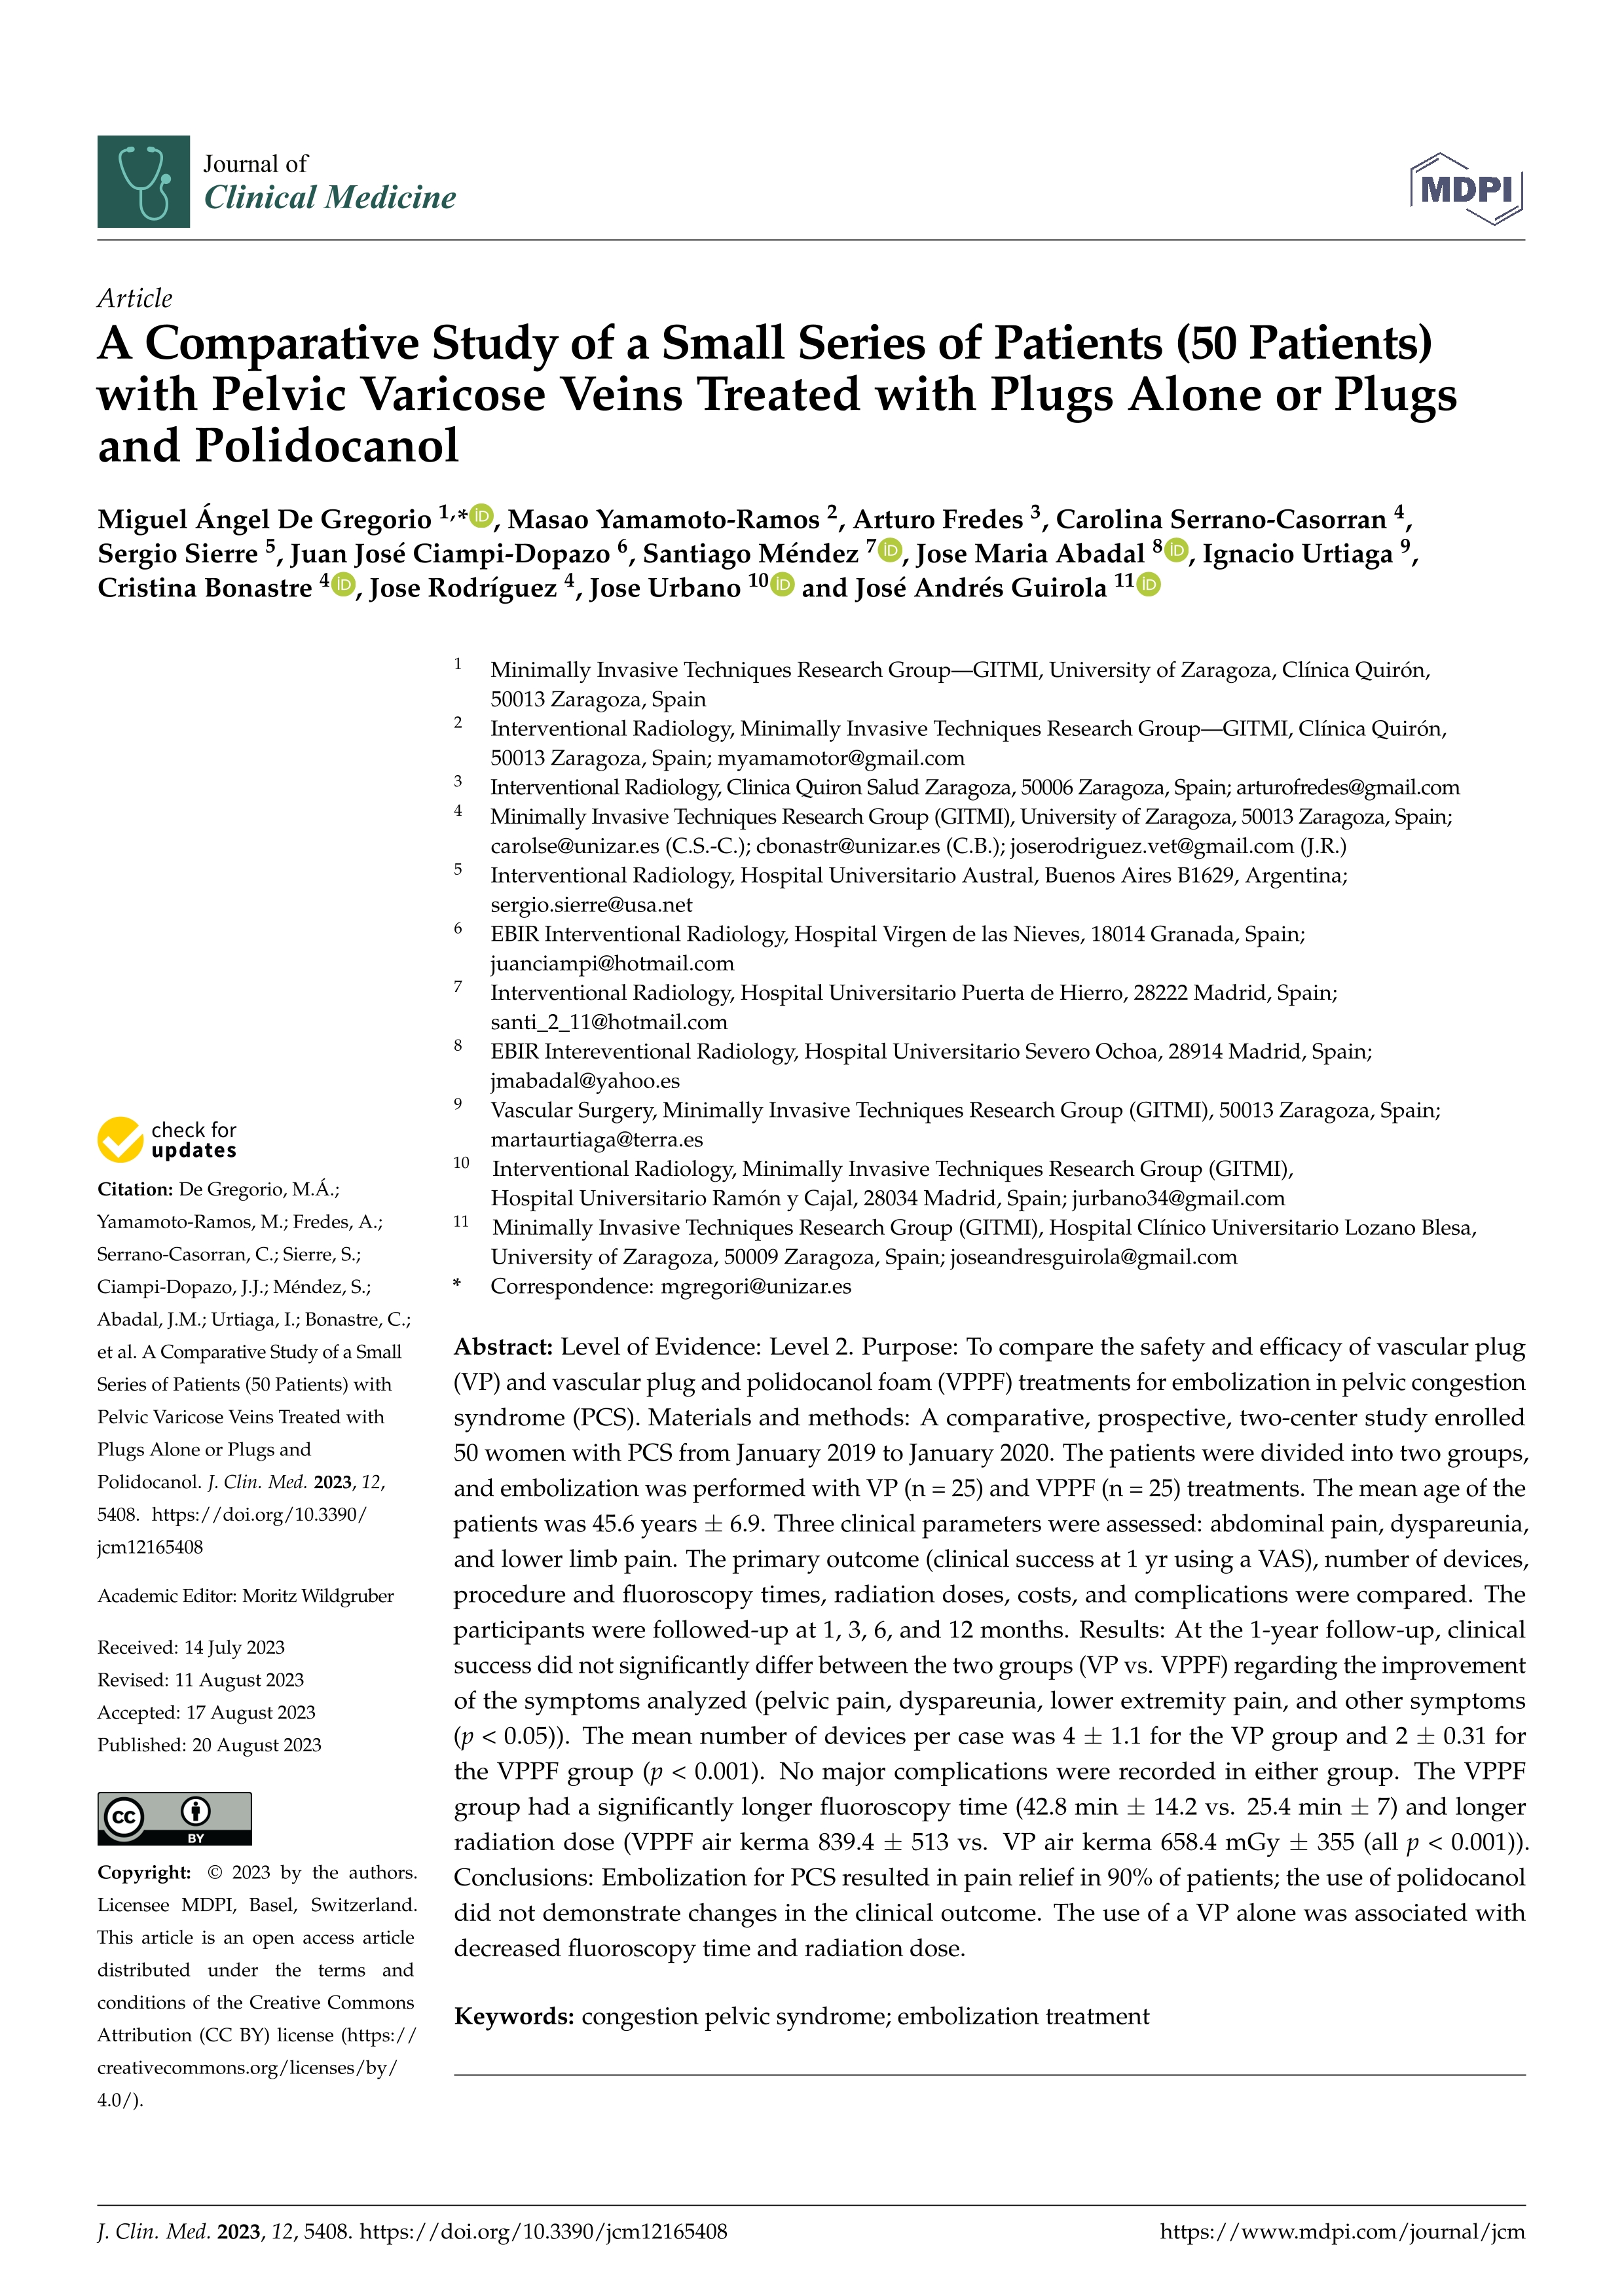 A comparative study of a small series of patients (50 patients) with pelvic varicose veins treated with plugs alone or plugs and polidocanol